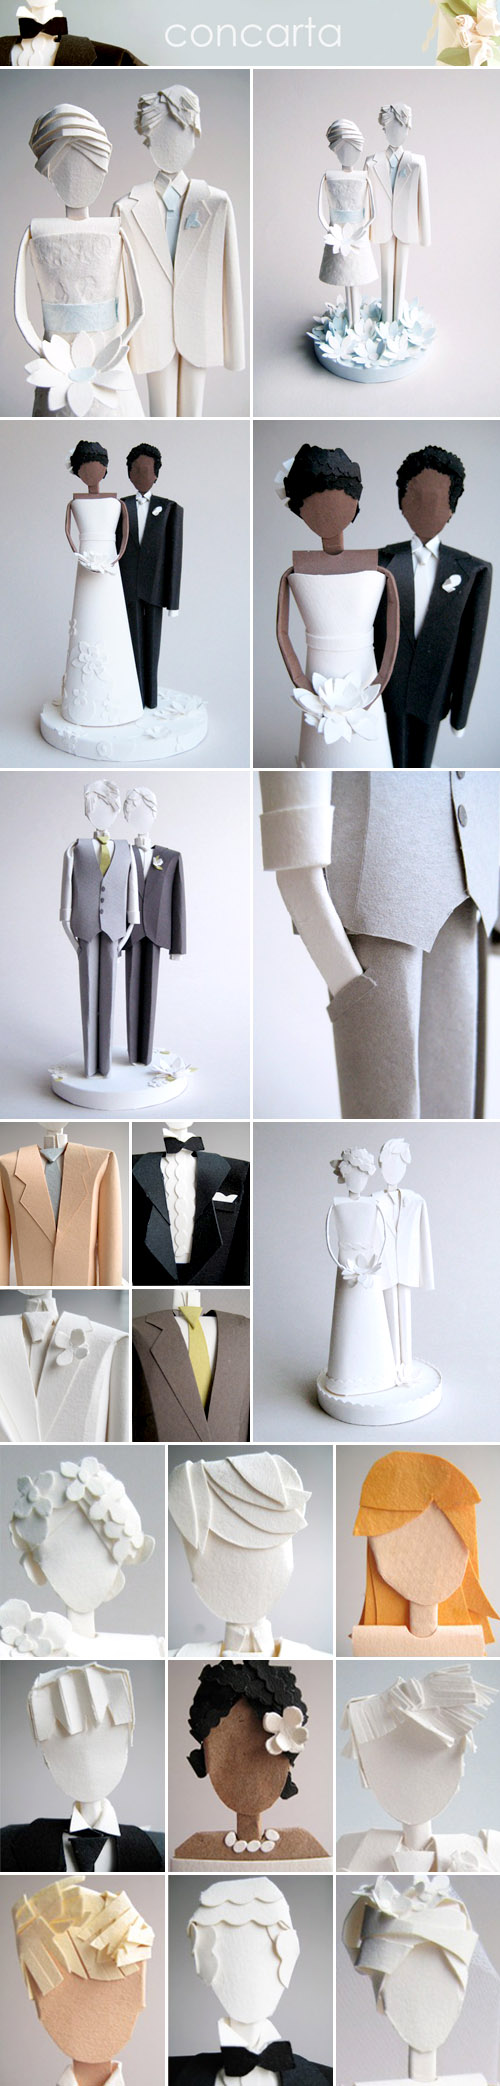 creative paper wedding cake toppers from concarta on etsy.com